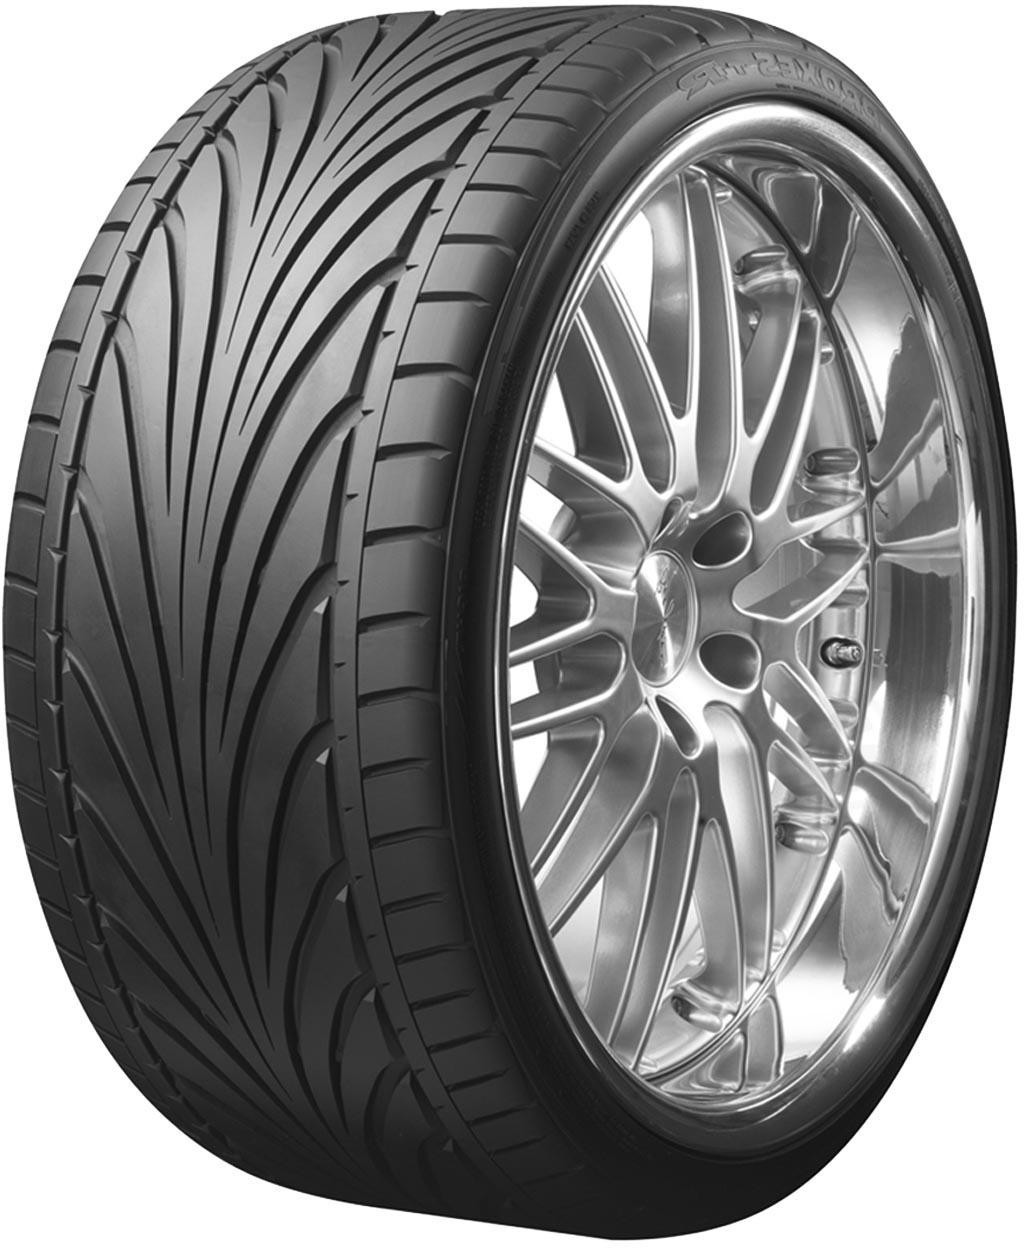 Toyo Proxes T1-R 195/55 R16 87V